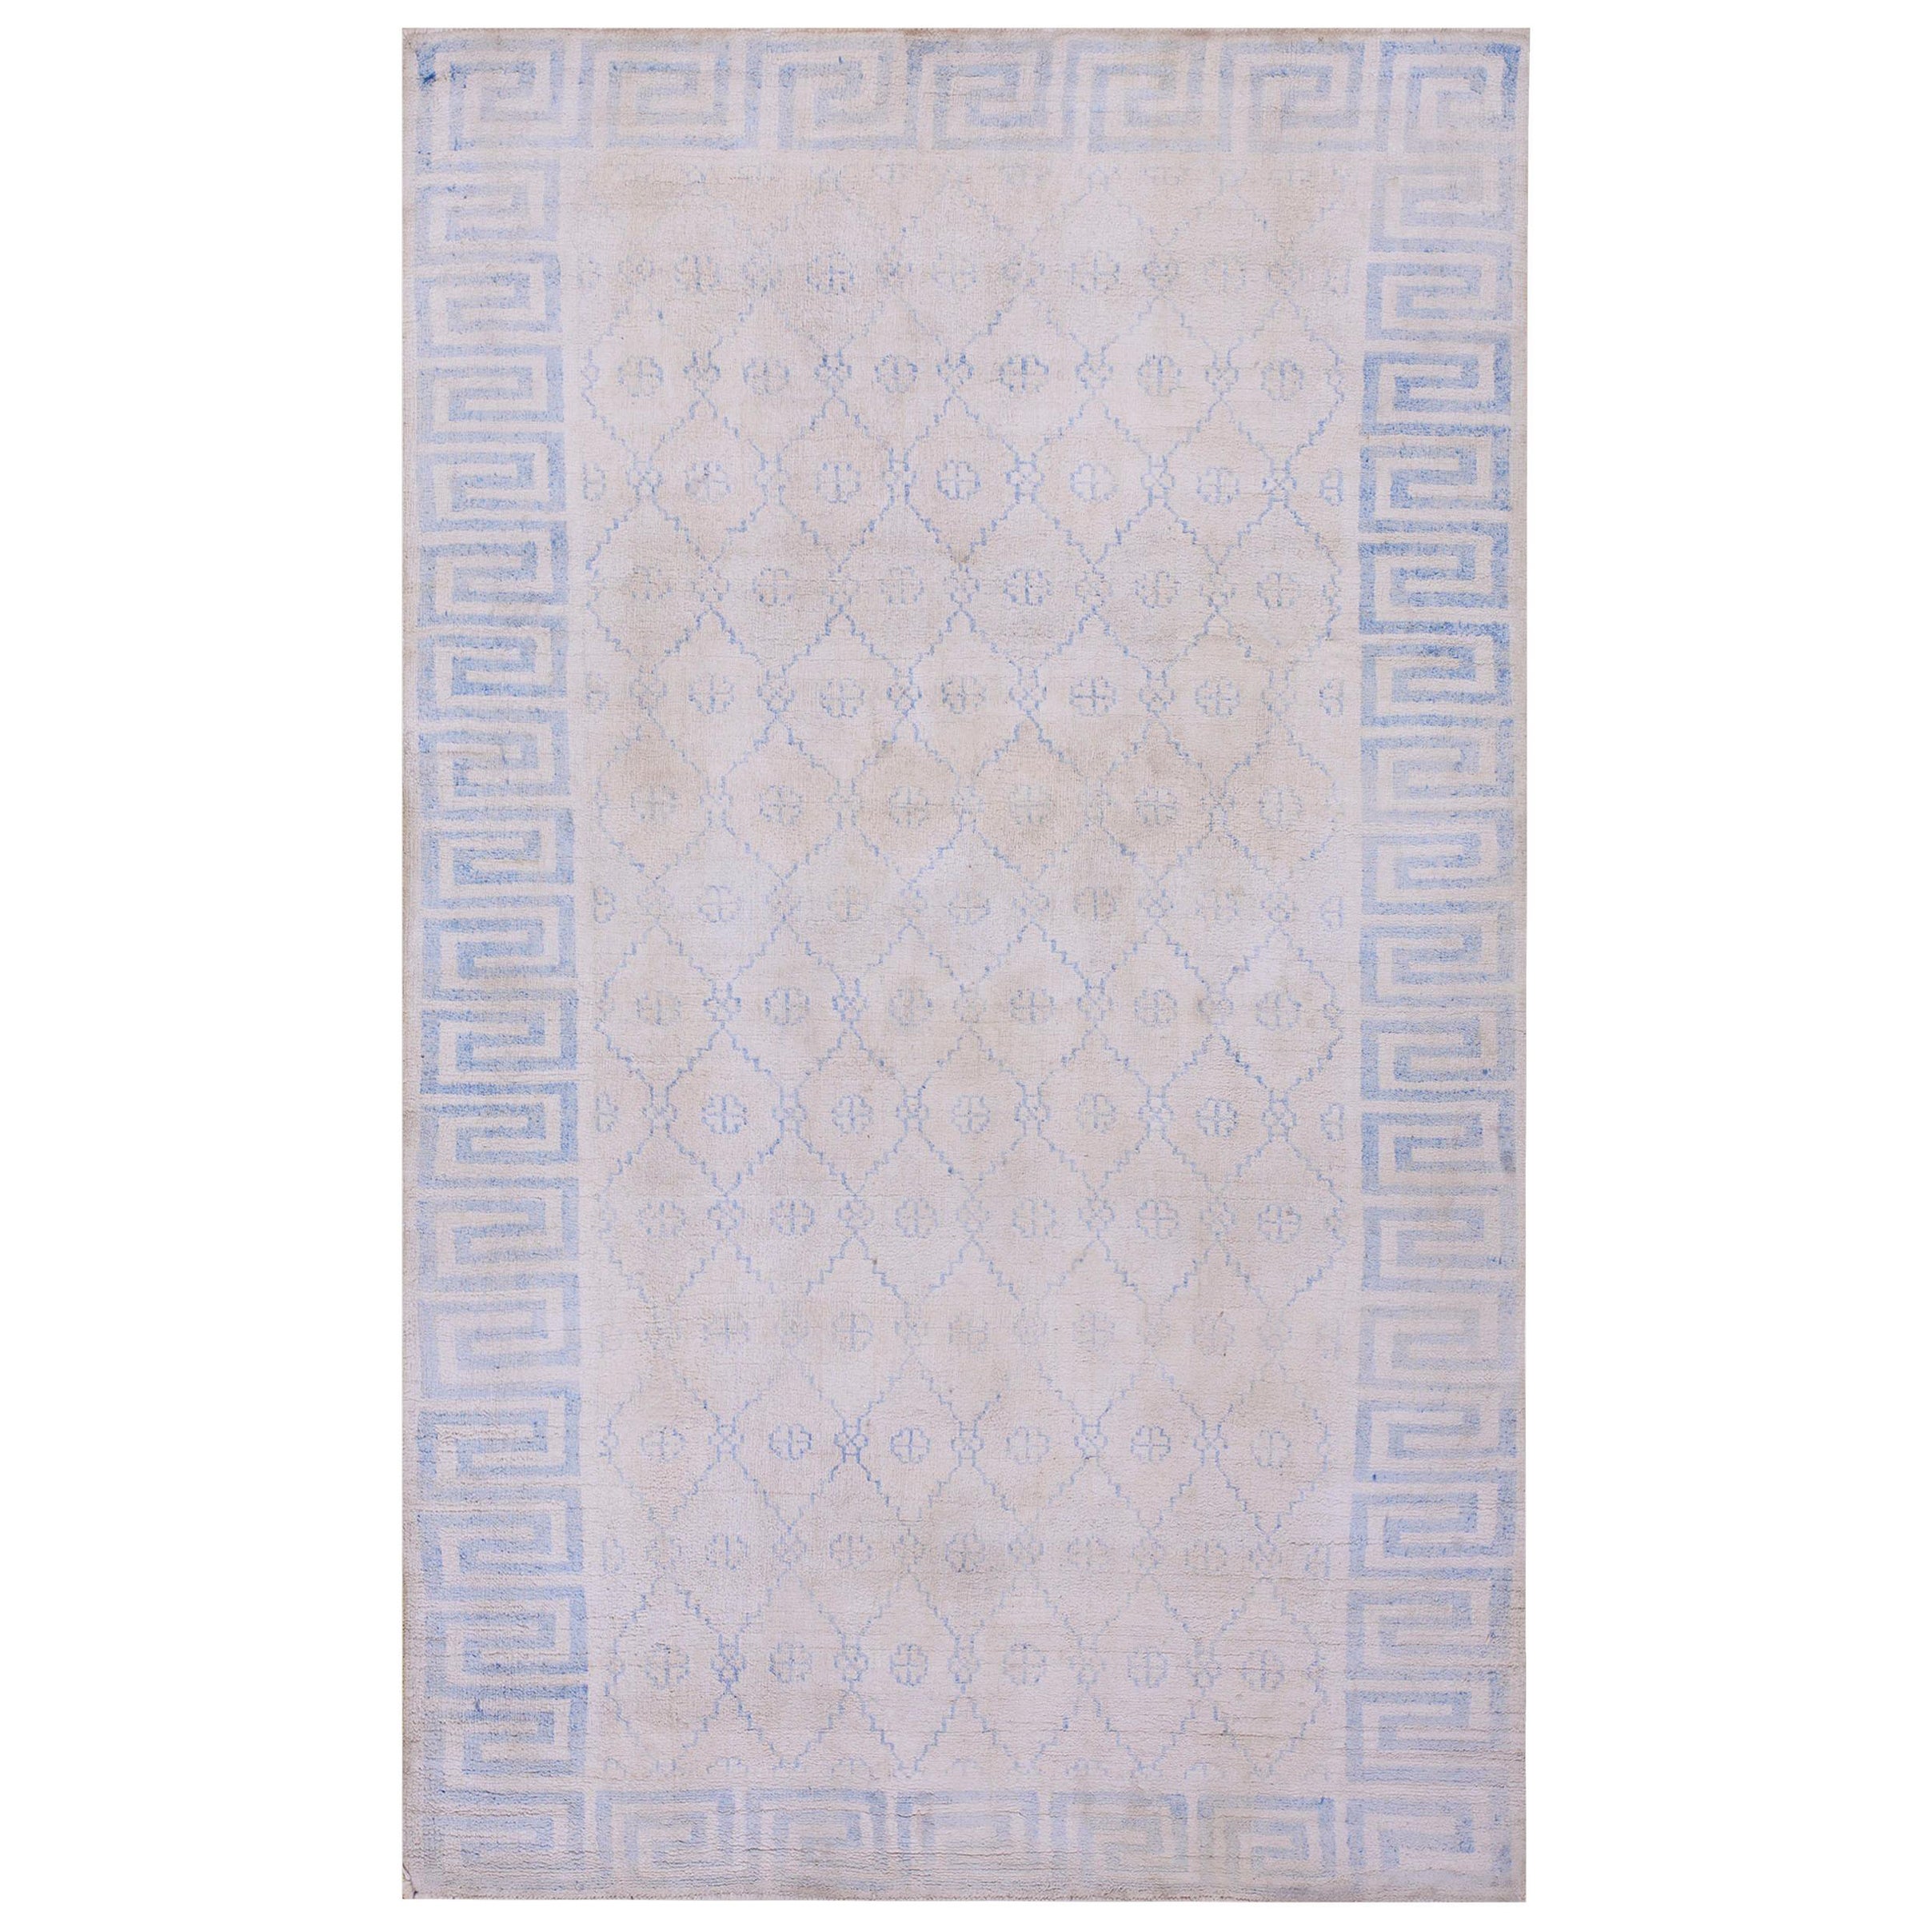 Early 20th Century Indian Cotton Agra Carpet ( 4' x 6'6" - 122 x 198 ) For Sale